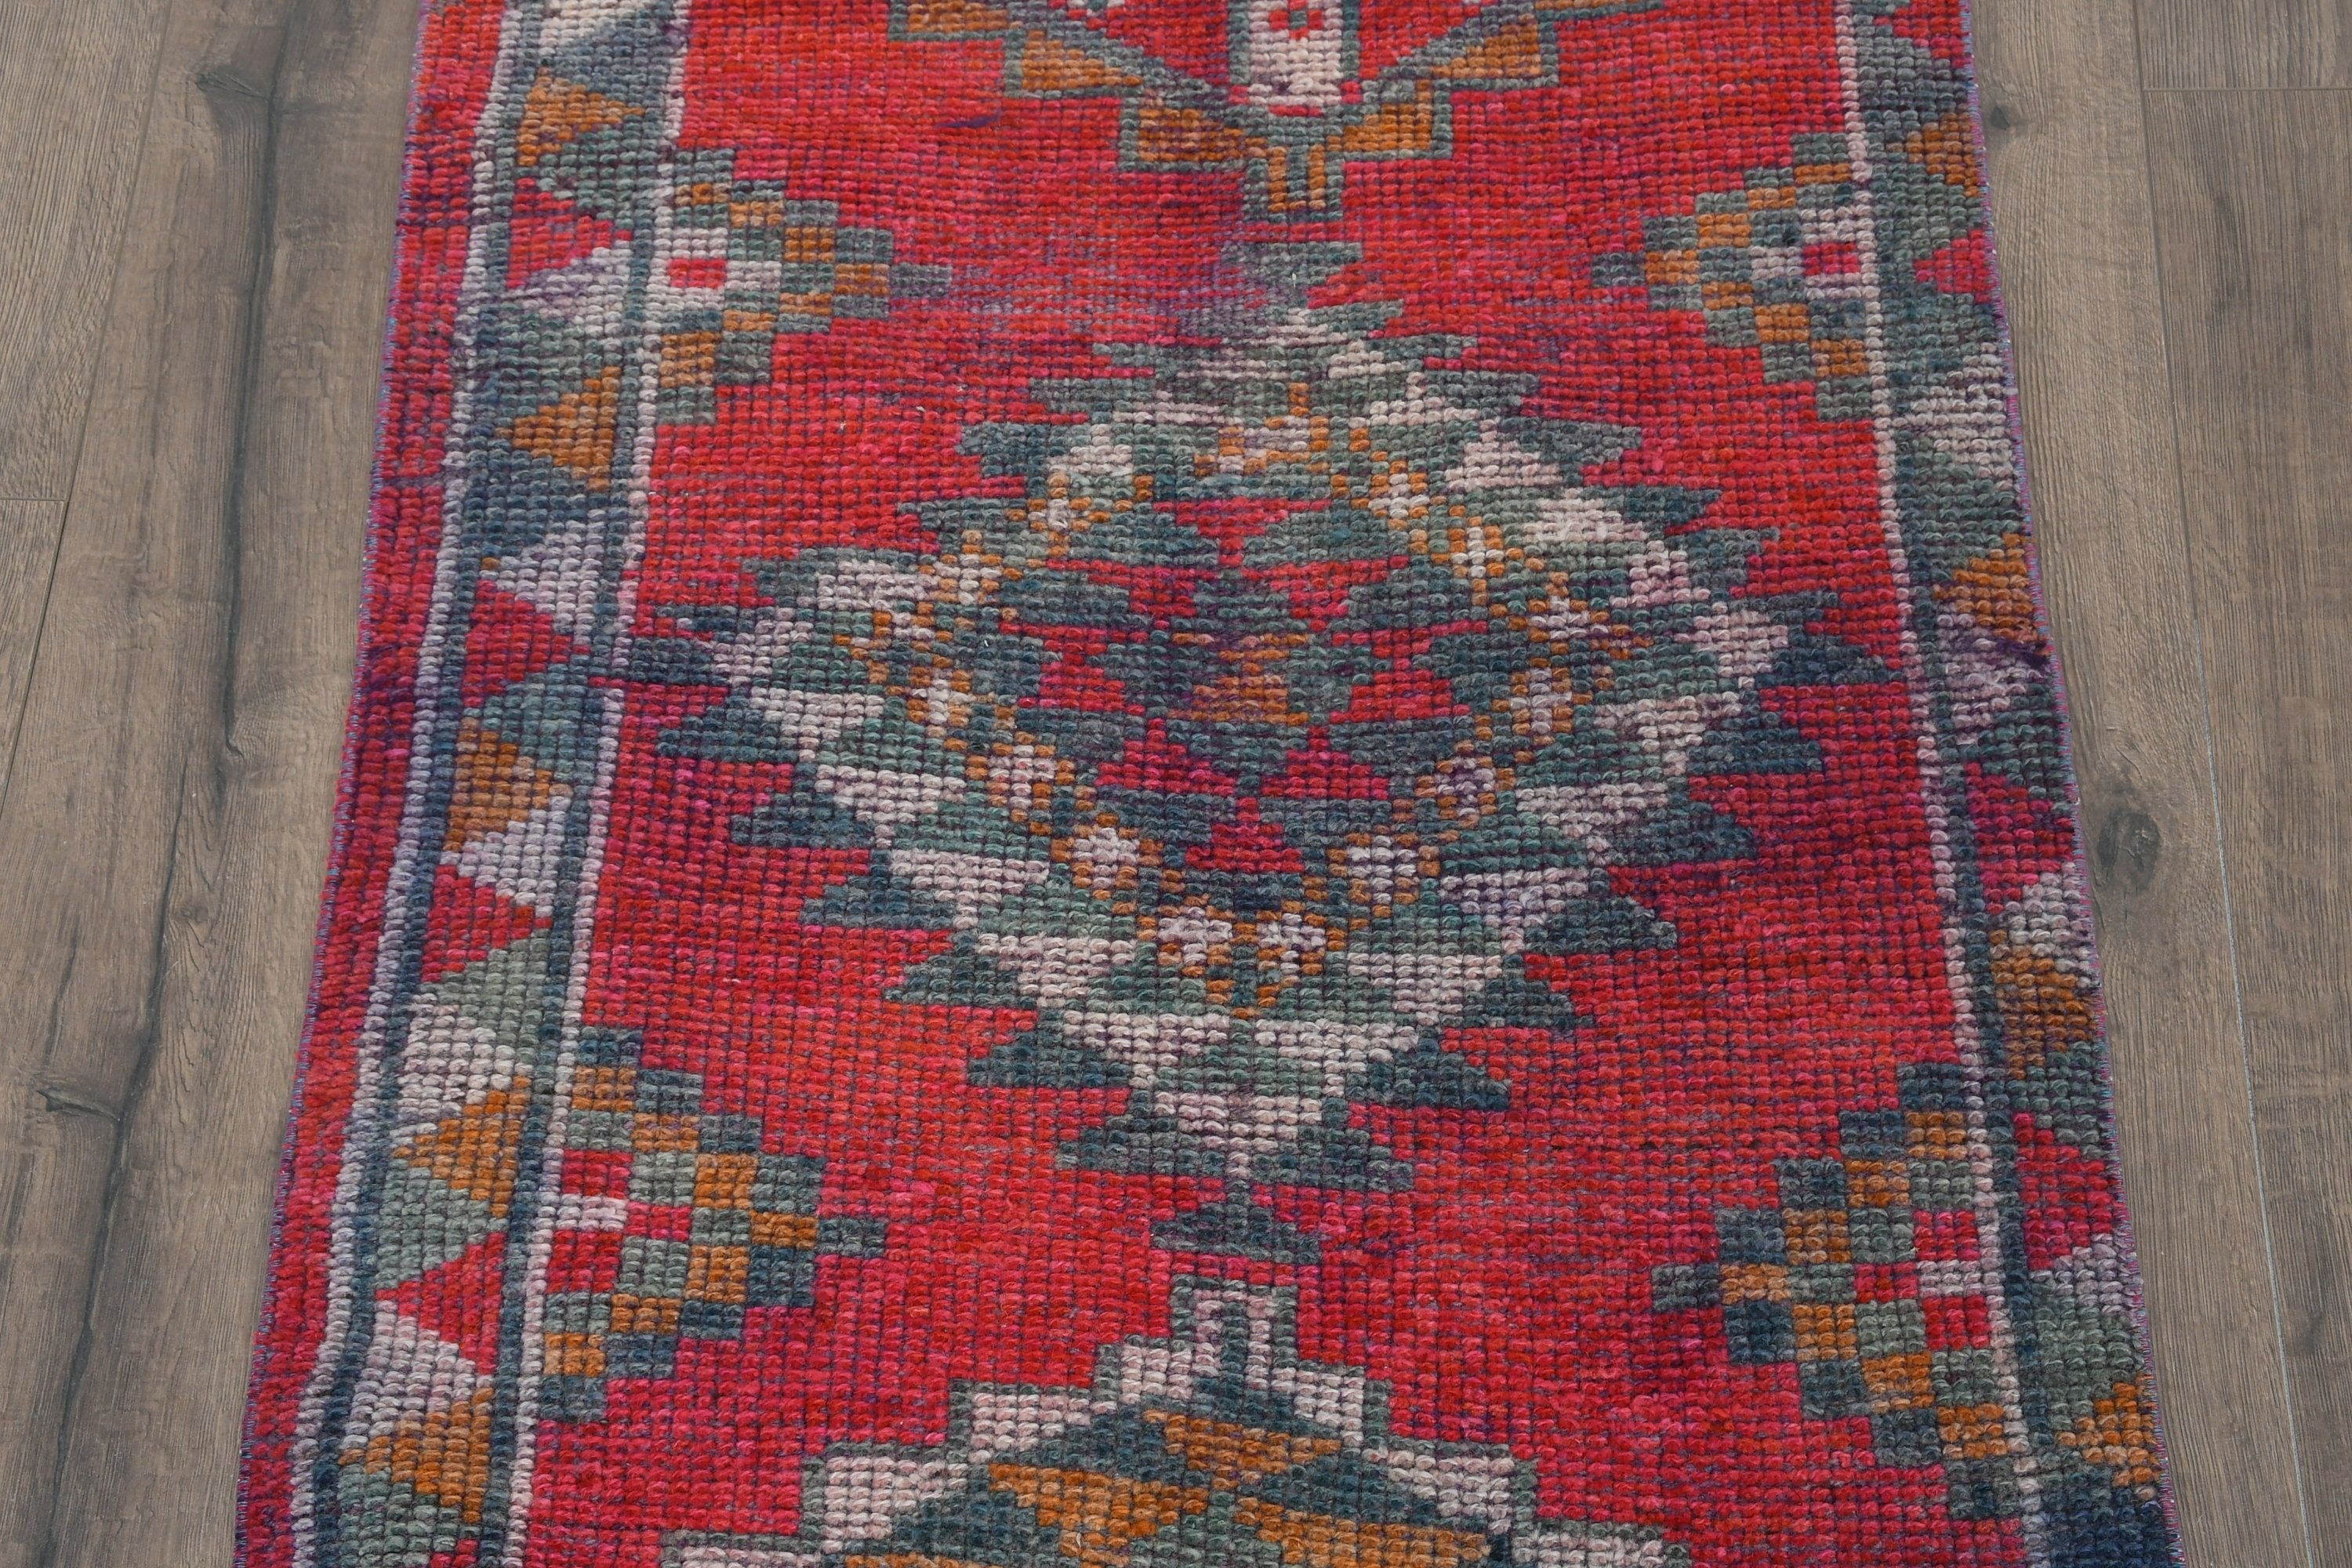 Home Decor Rug, Vintage Rug, Turkish Rugs, Kitchen Rugs, Pale Rug, Rugs for Kitchen, Wool Rug, Pink Moroccan Rug, 2.3x11.4 ft Runner Rugs